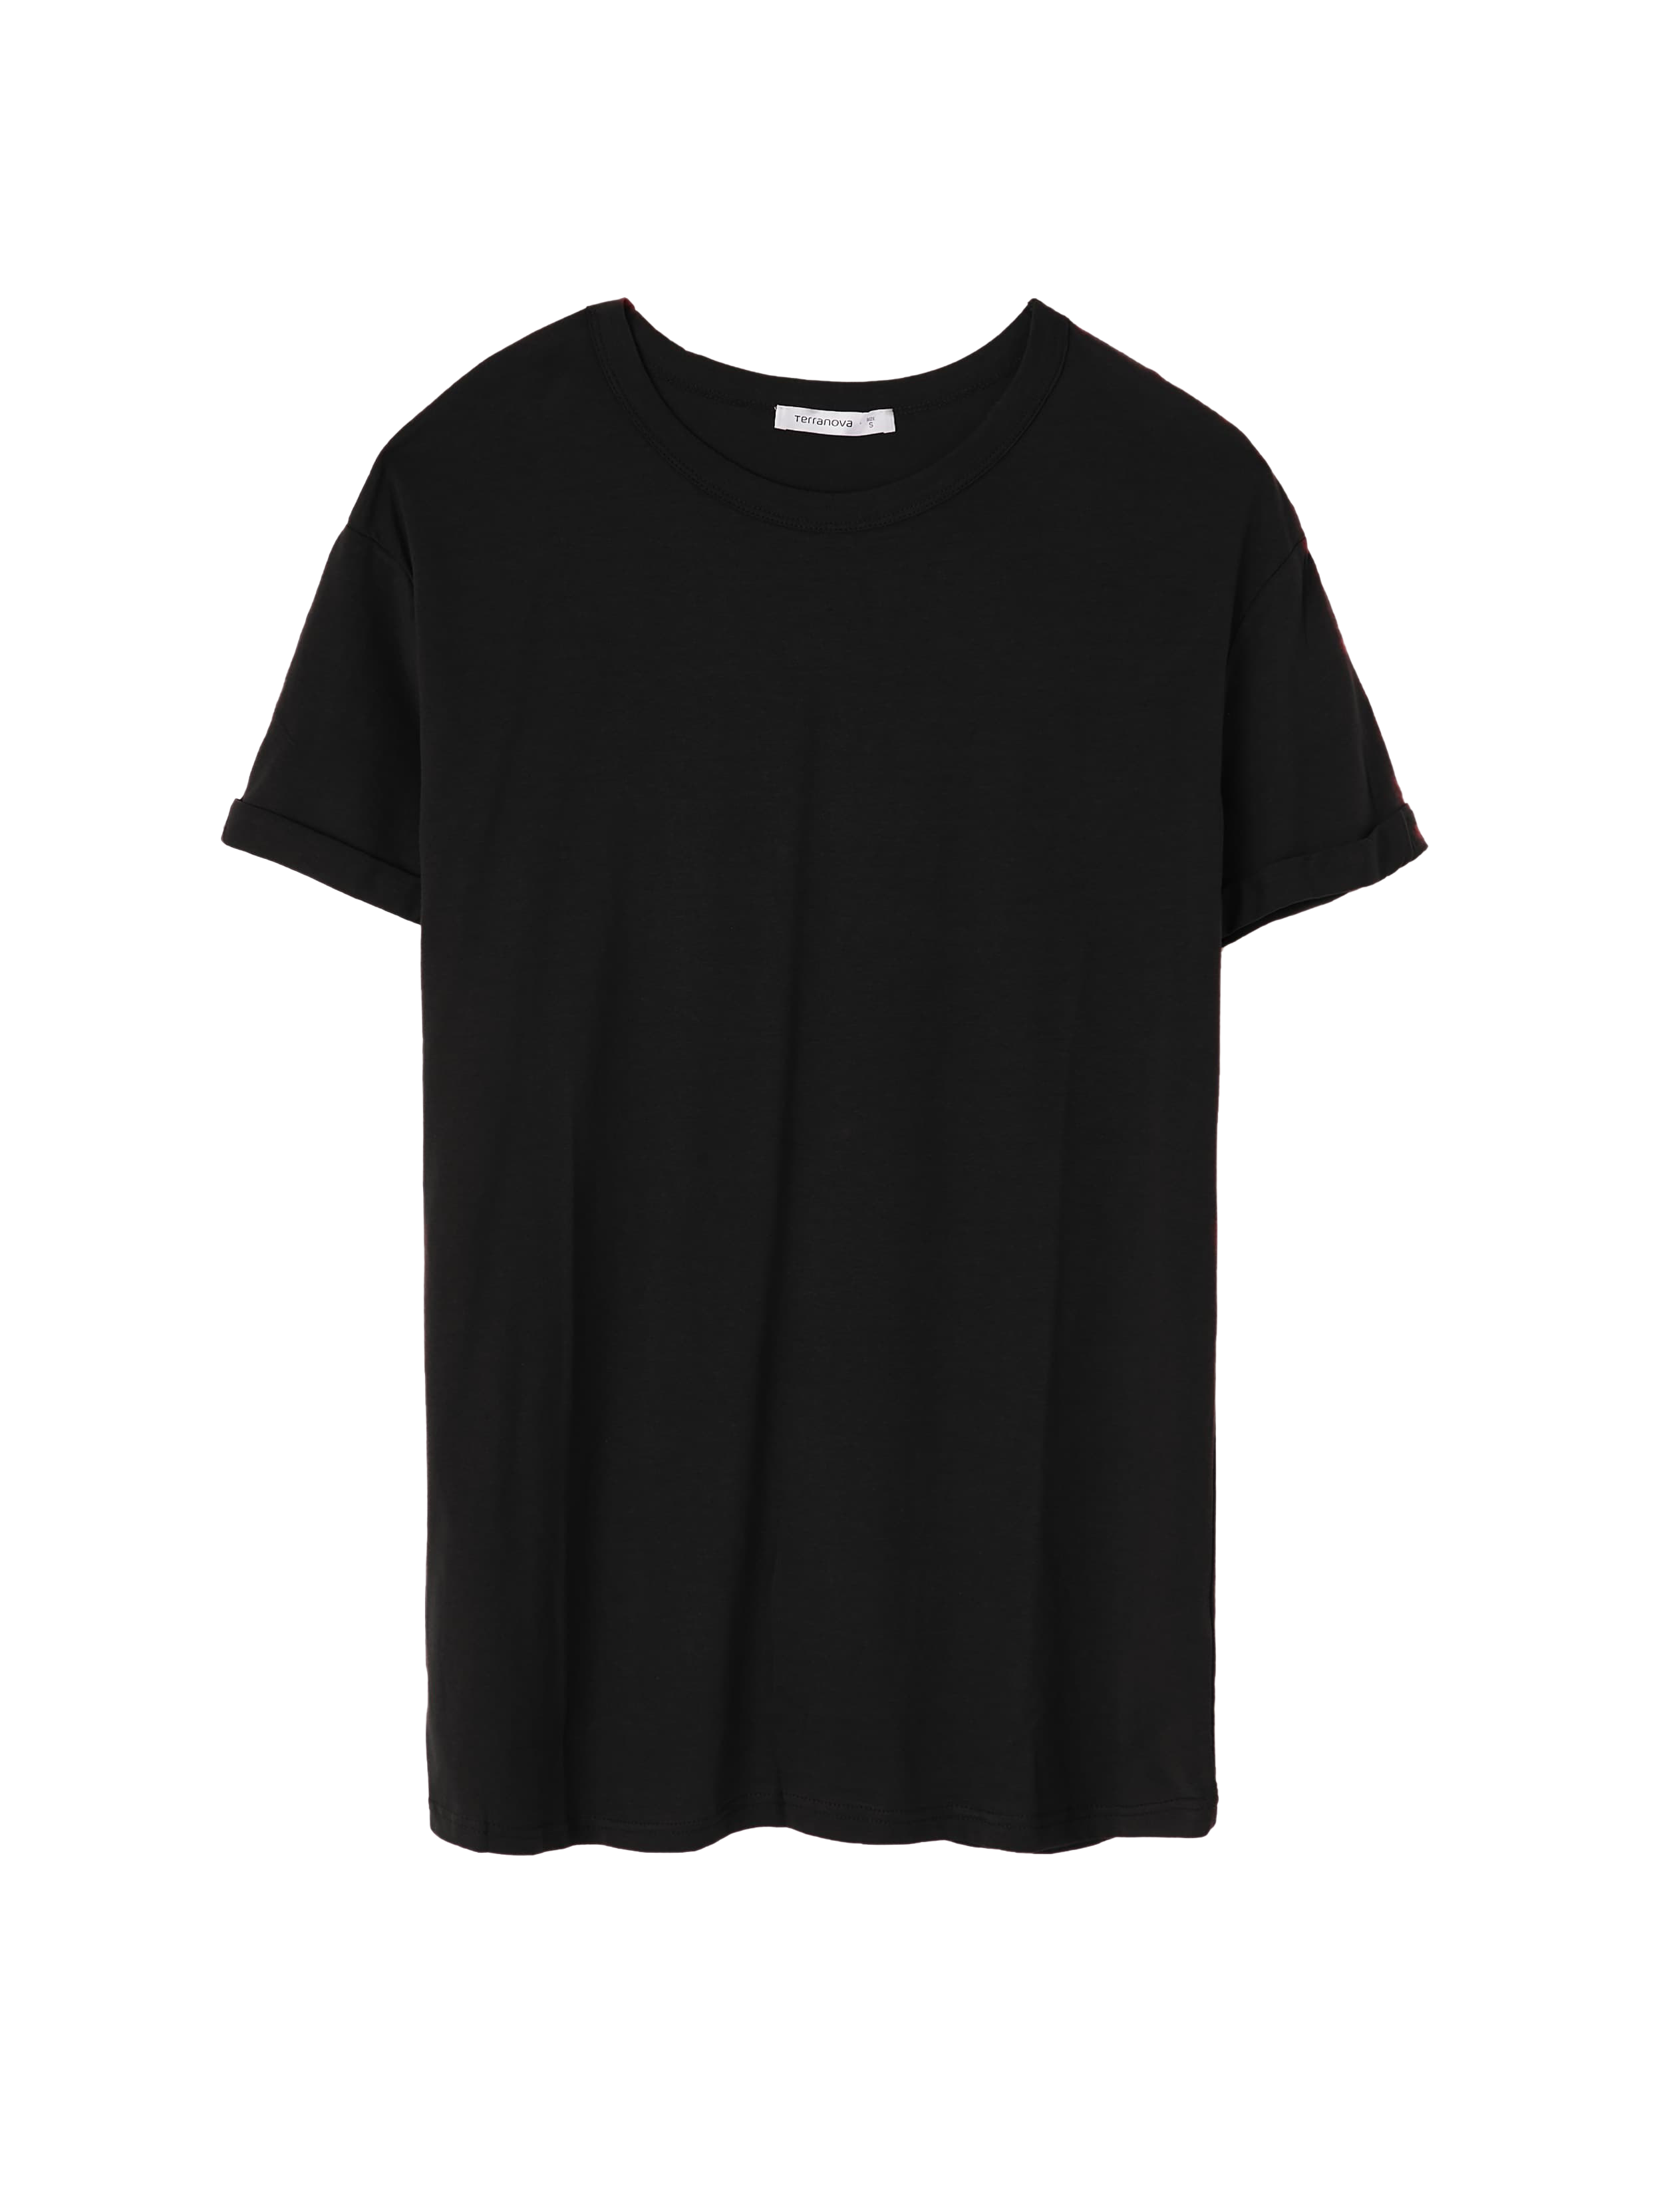 Download Freestyle: High Resolution Plain Black T Shirt Png